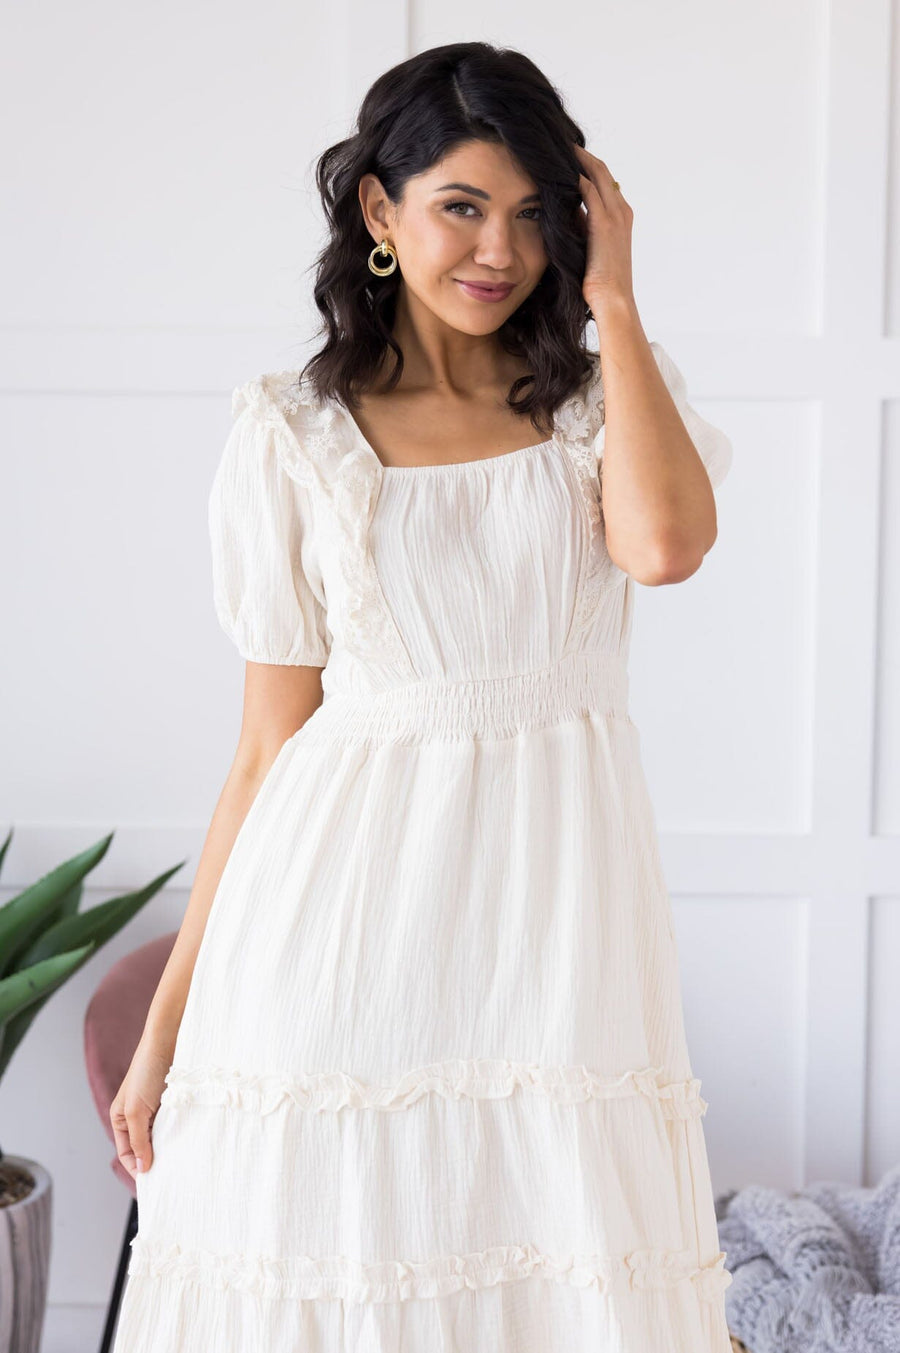 Shop Modest Dresses for Women | Conservative Clothing Page 4